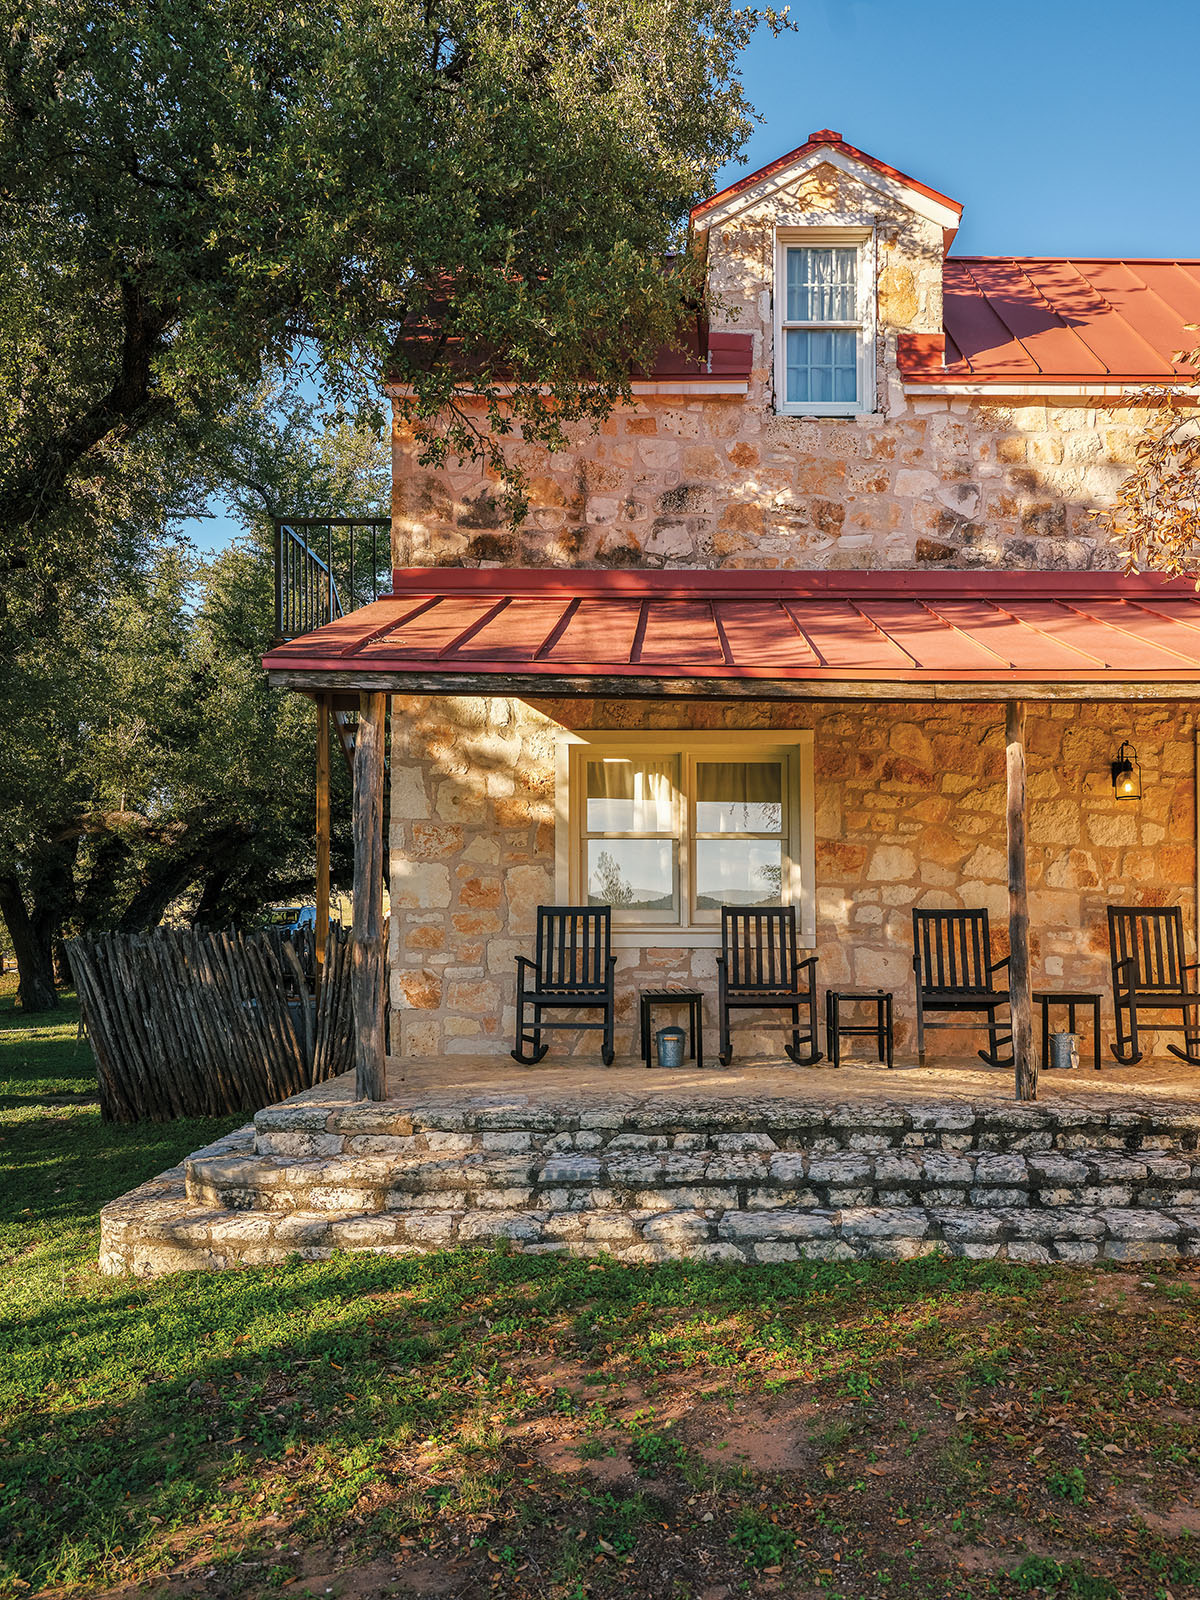 The exterior of a stone building with chairs on a porch